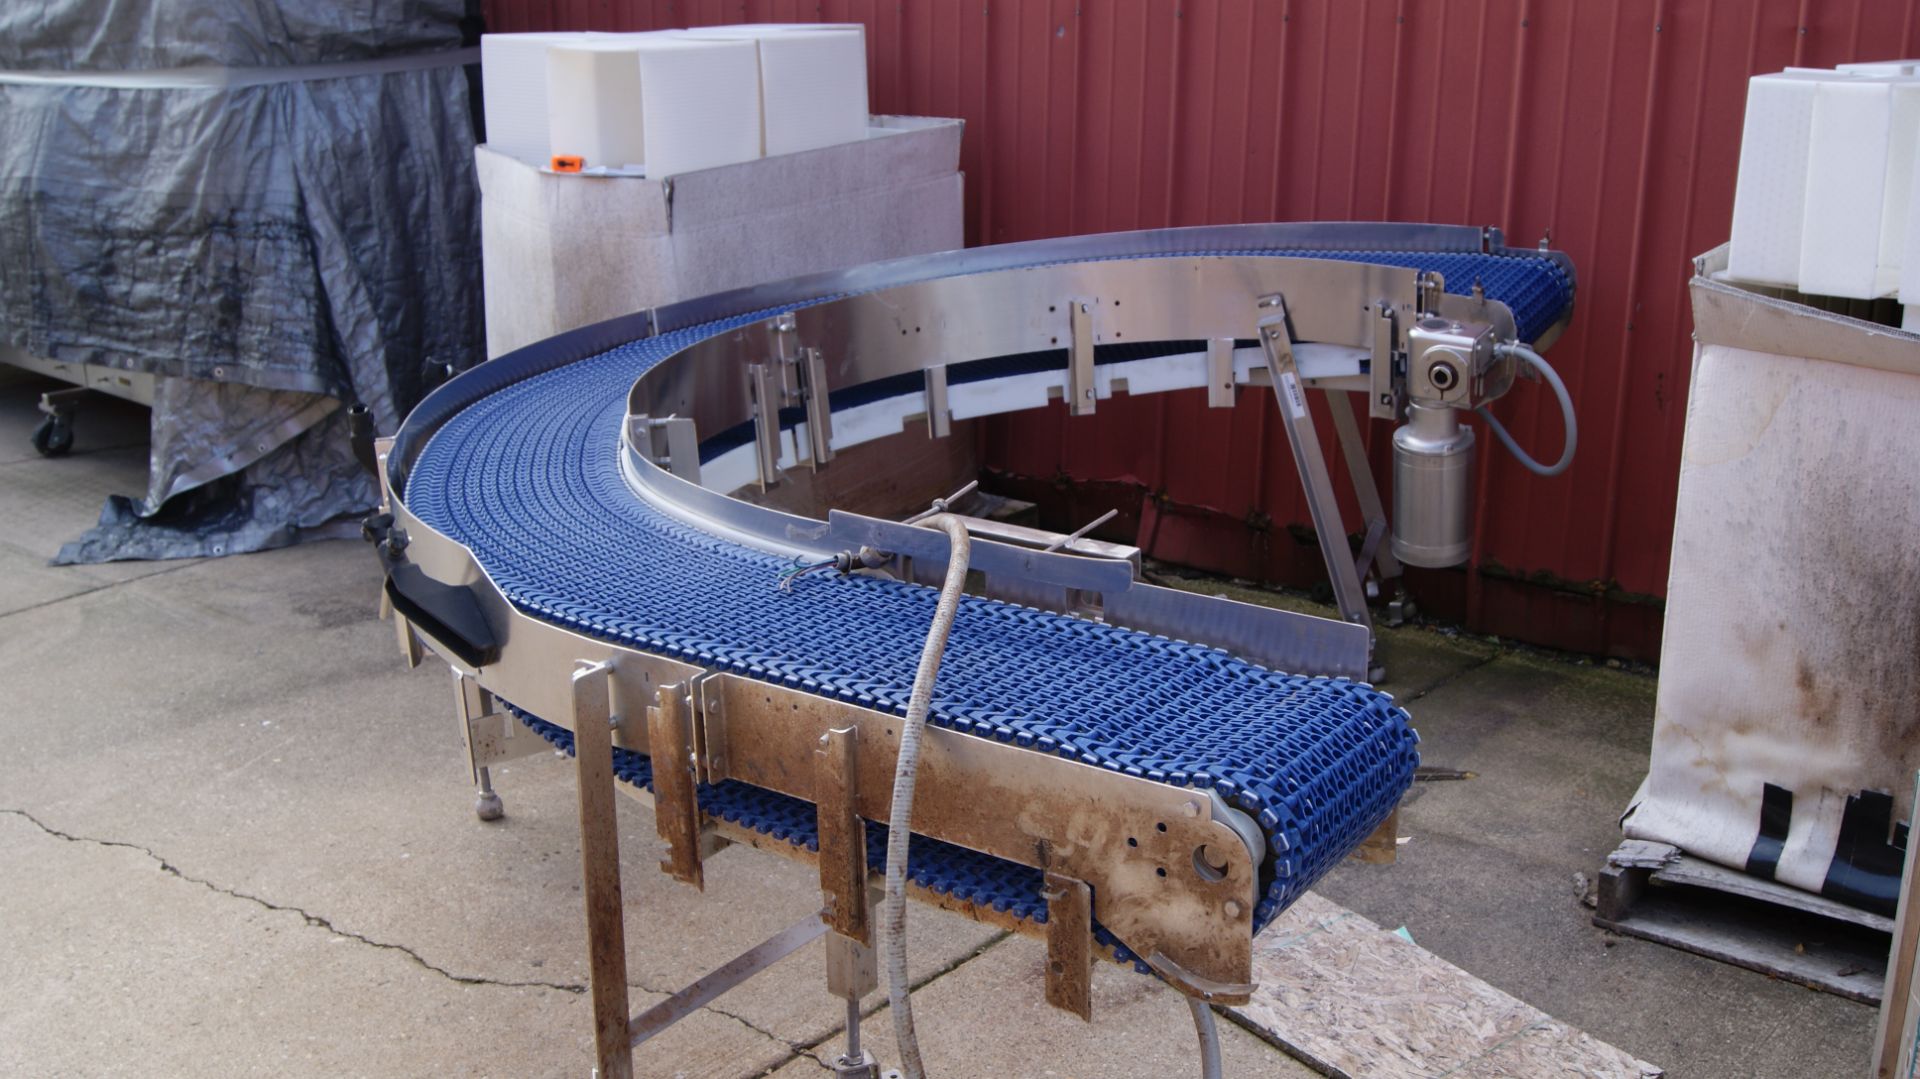 All S/S Plastic Belt 180° Belt Conveyor with S/S Drive Motor: 12"W Belt 7'L to Curve on infeed; 5'